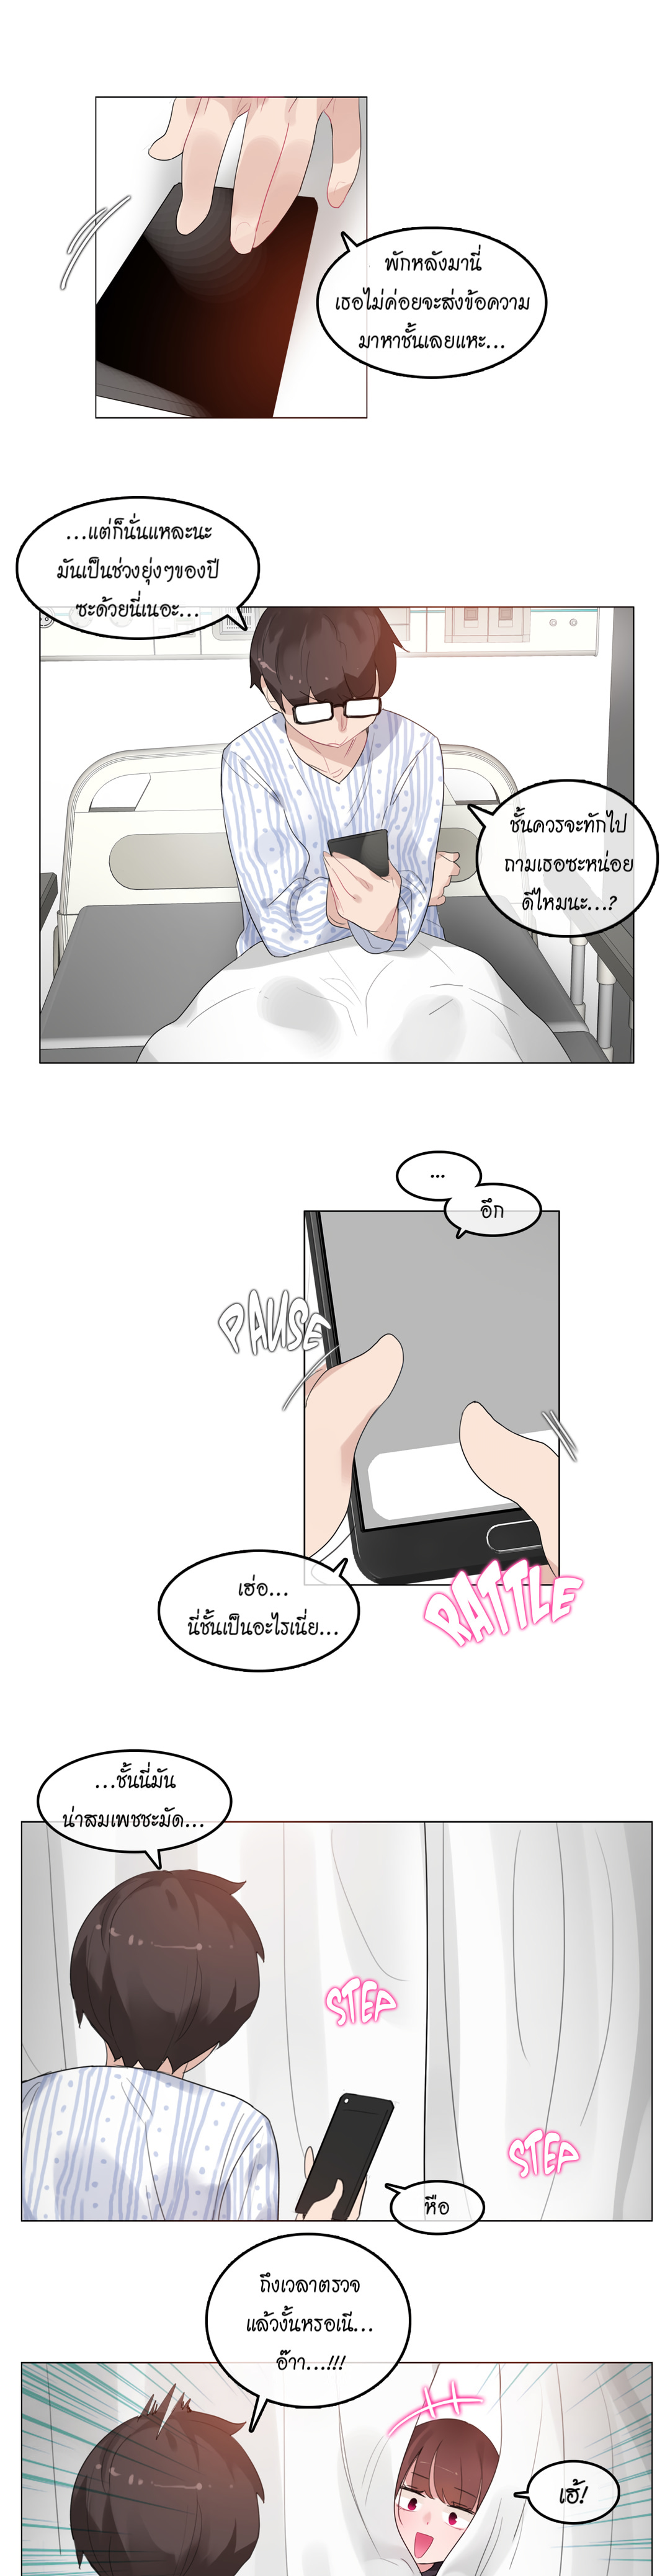 A Pervert’s Daily Life50 (7)